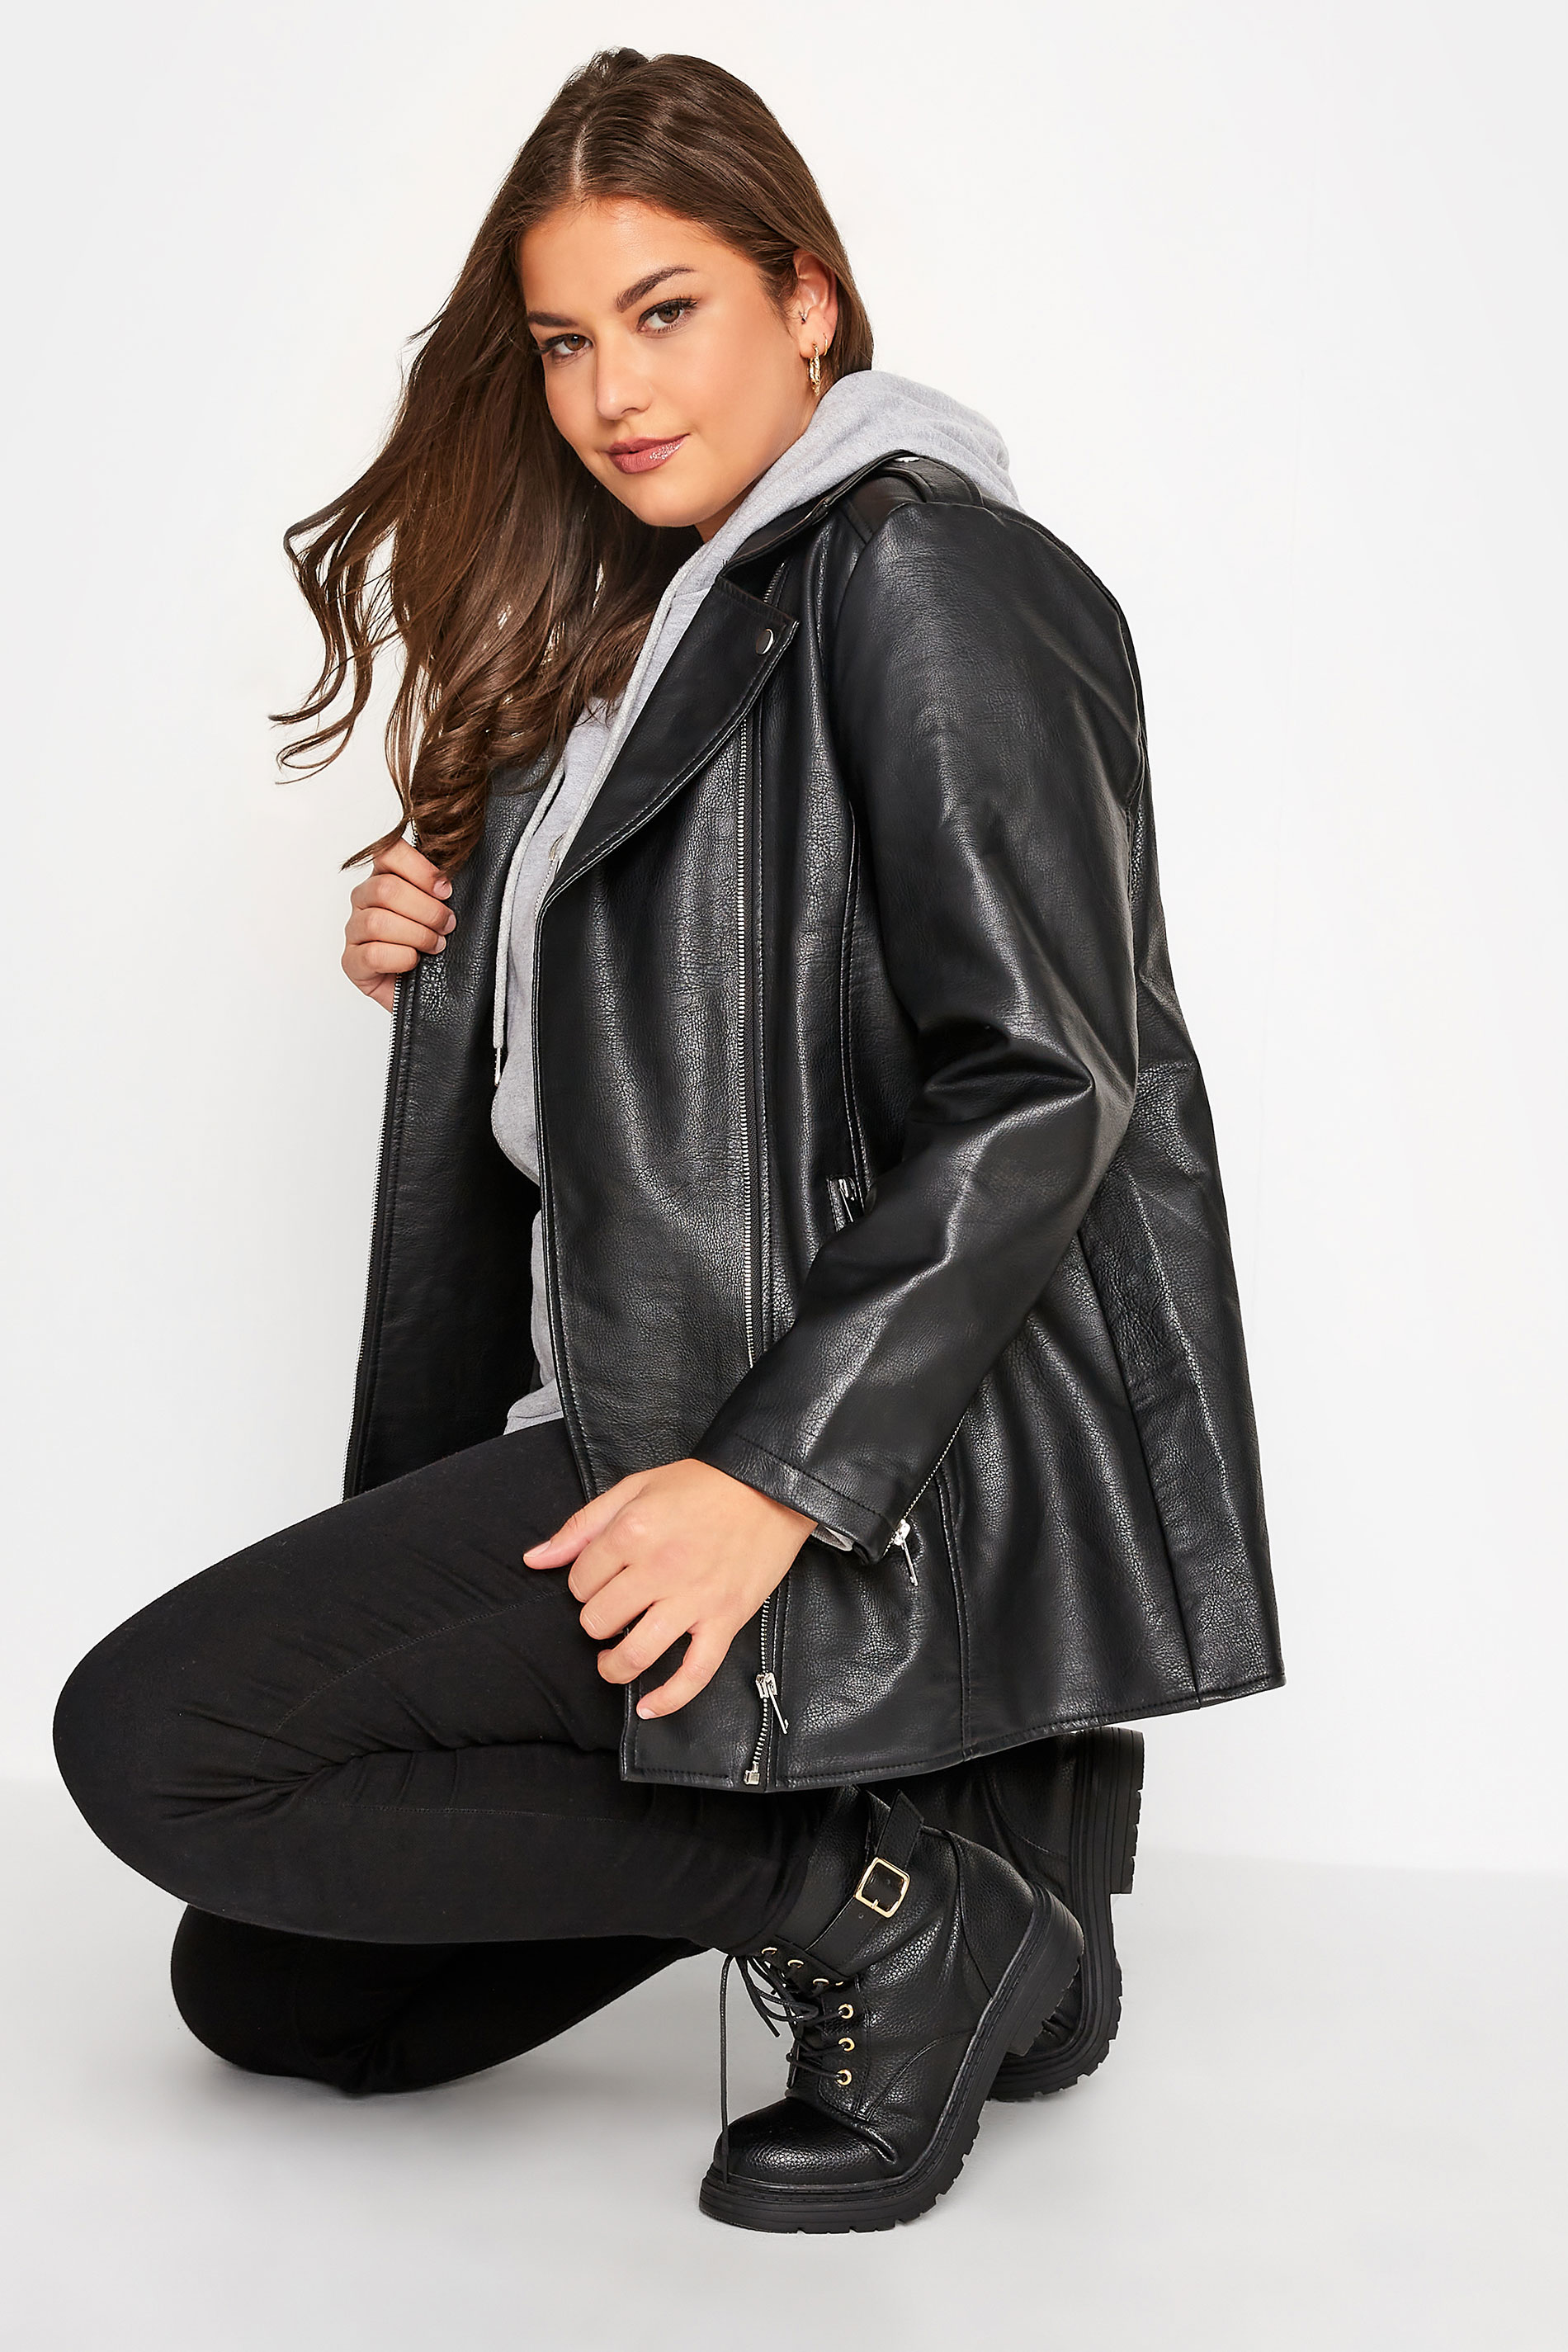 Yours Clothing Womens Plus Size PU Faux Leather Jacket 